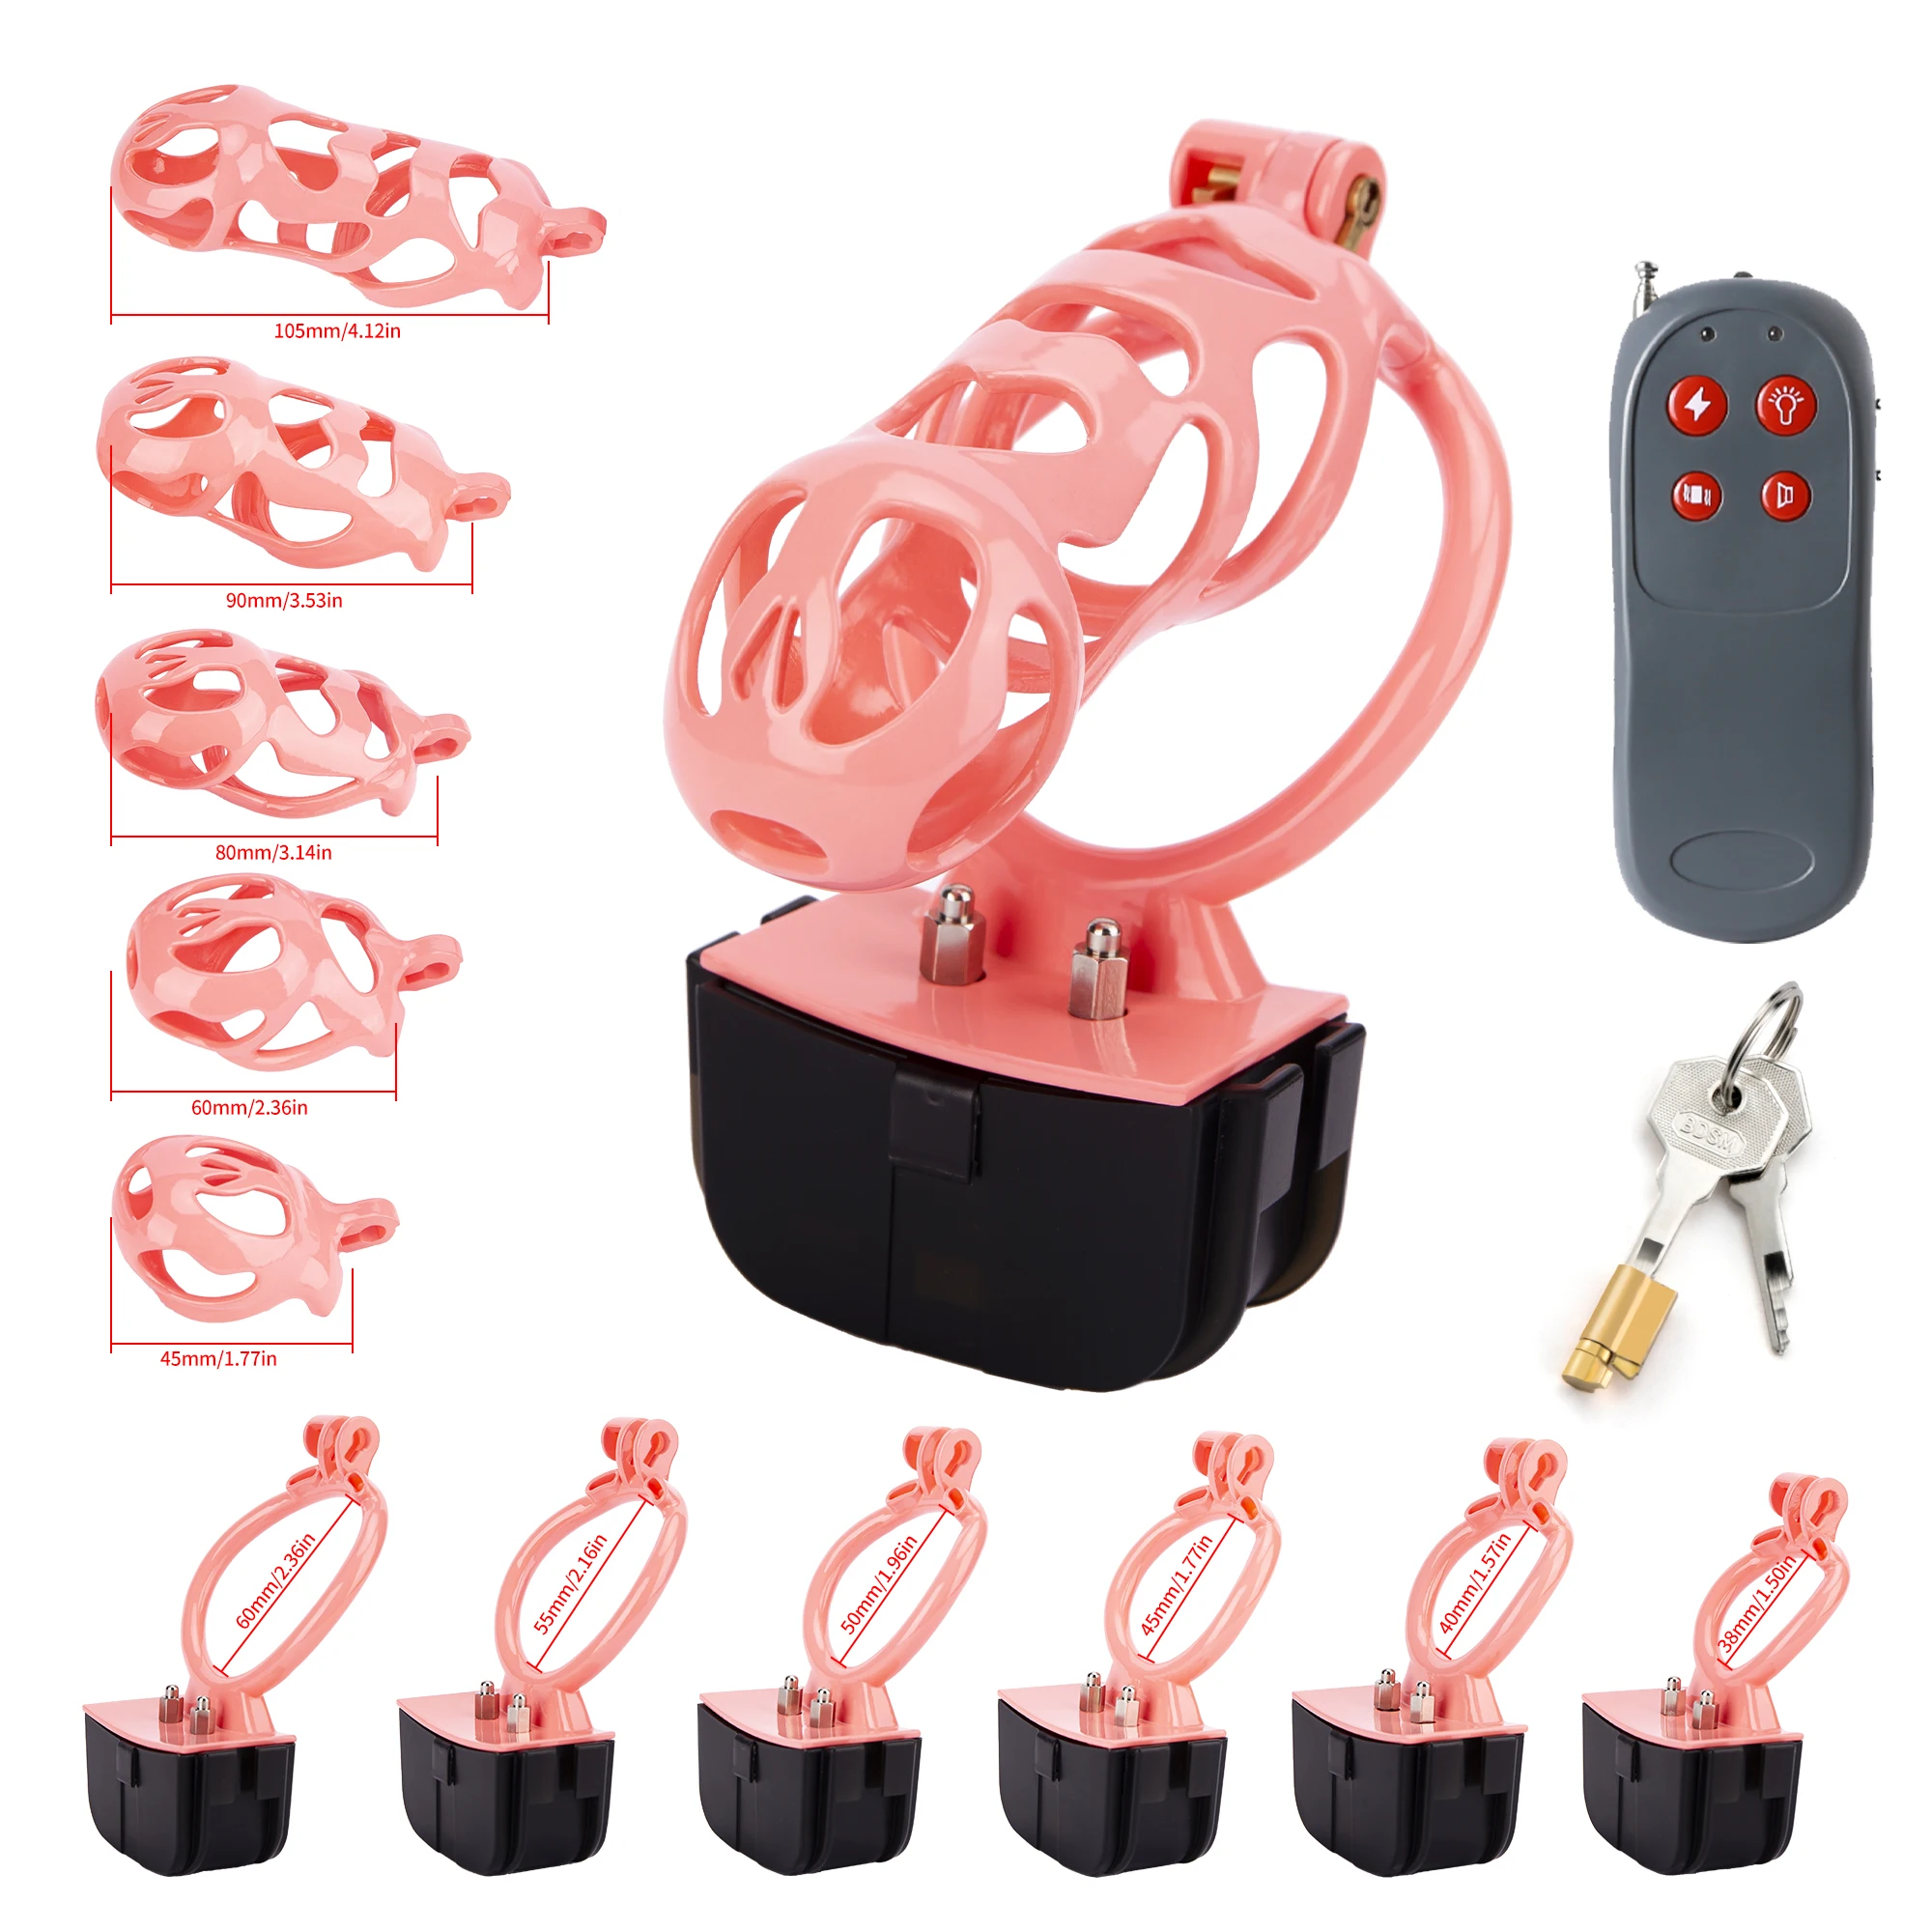 

Pink Electric Shock Ghost Sissy Male Chastity Cage Electro Stimulation Cock Cage Lock Curved Penis Ring BDSM Sex Toys For Men